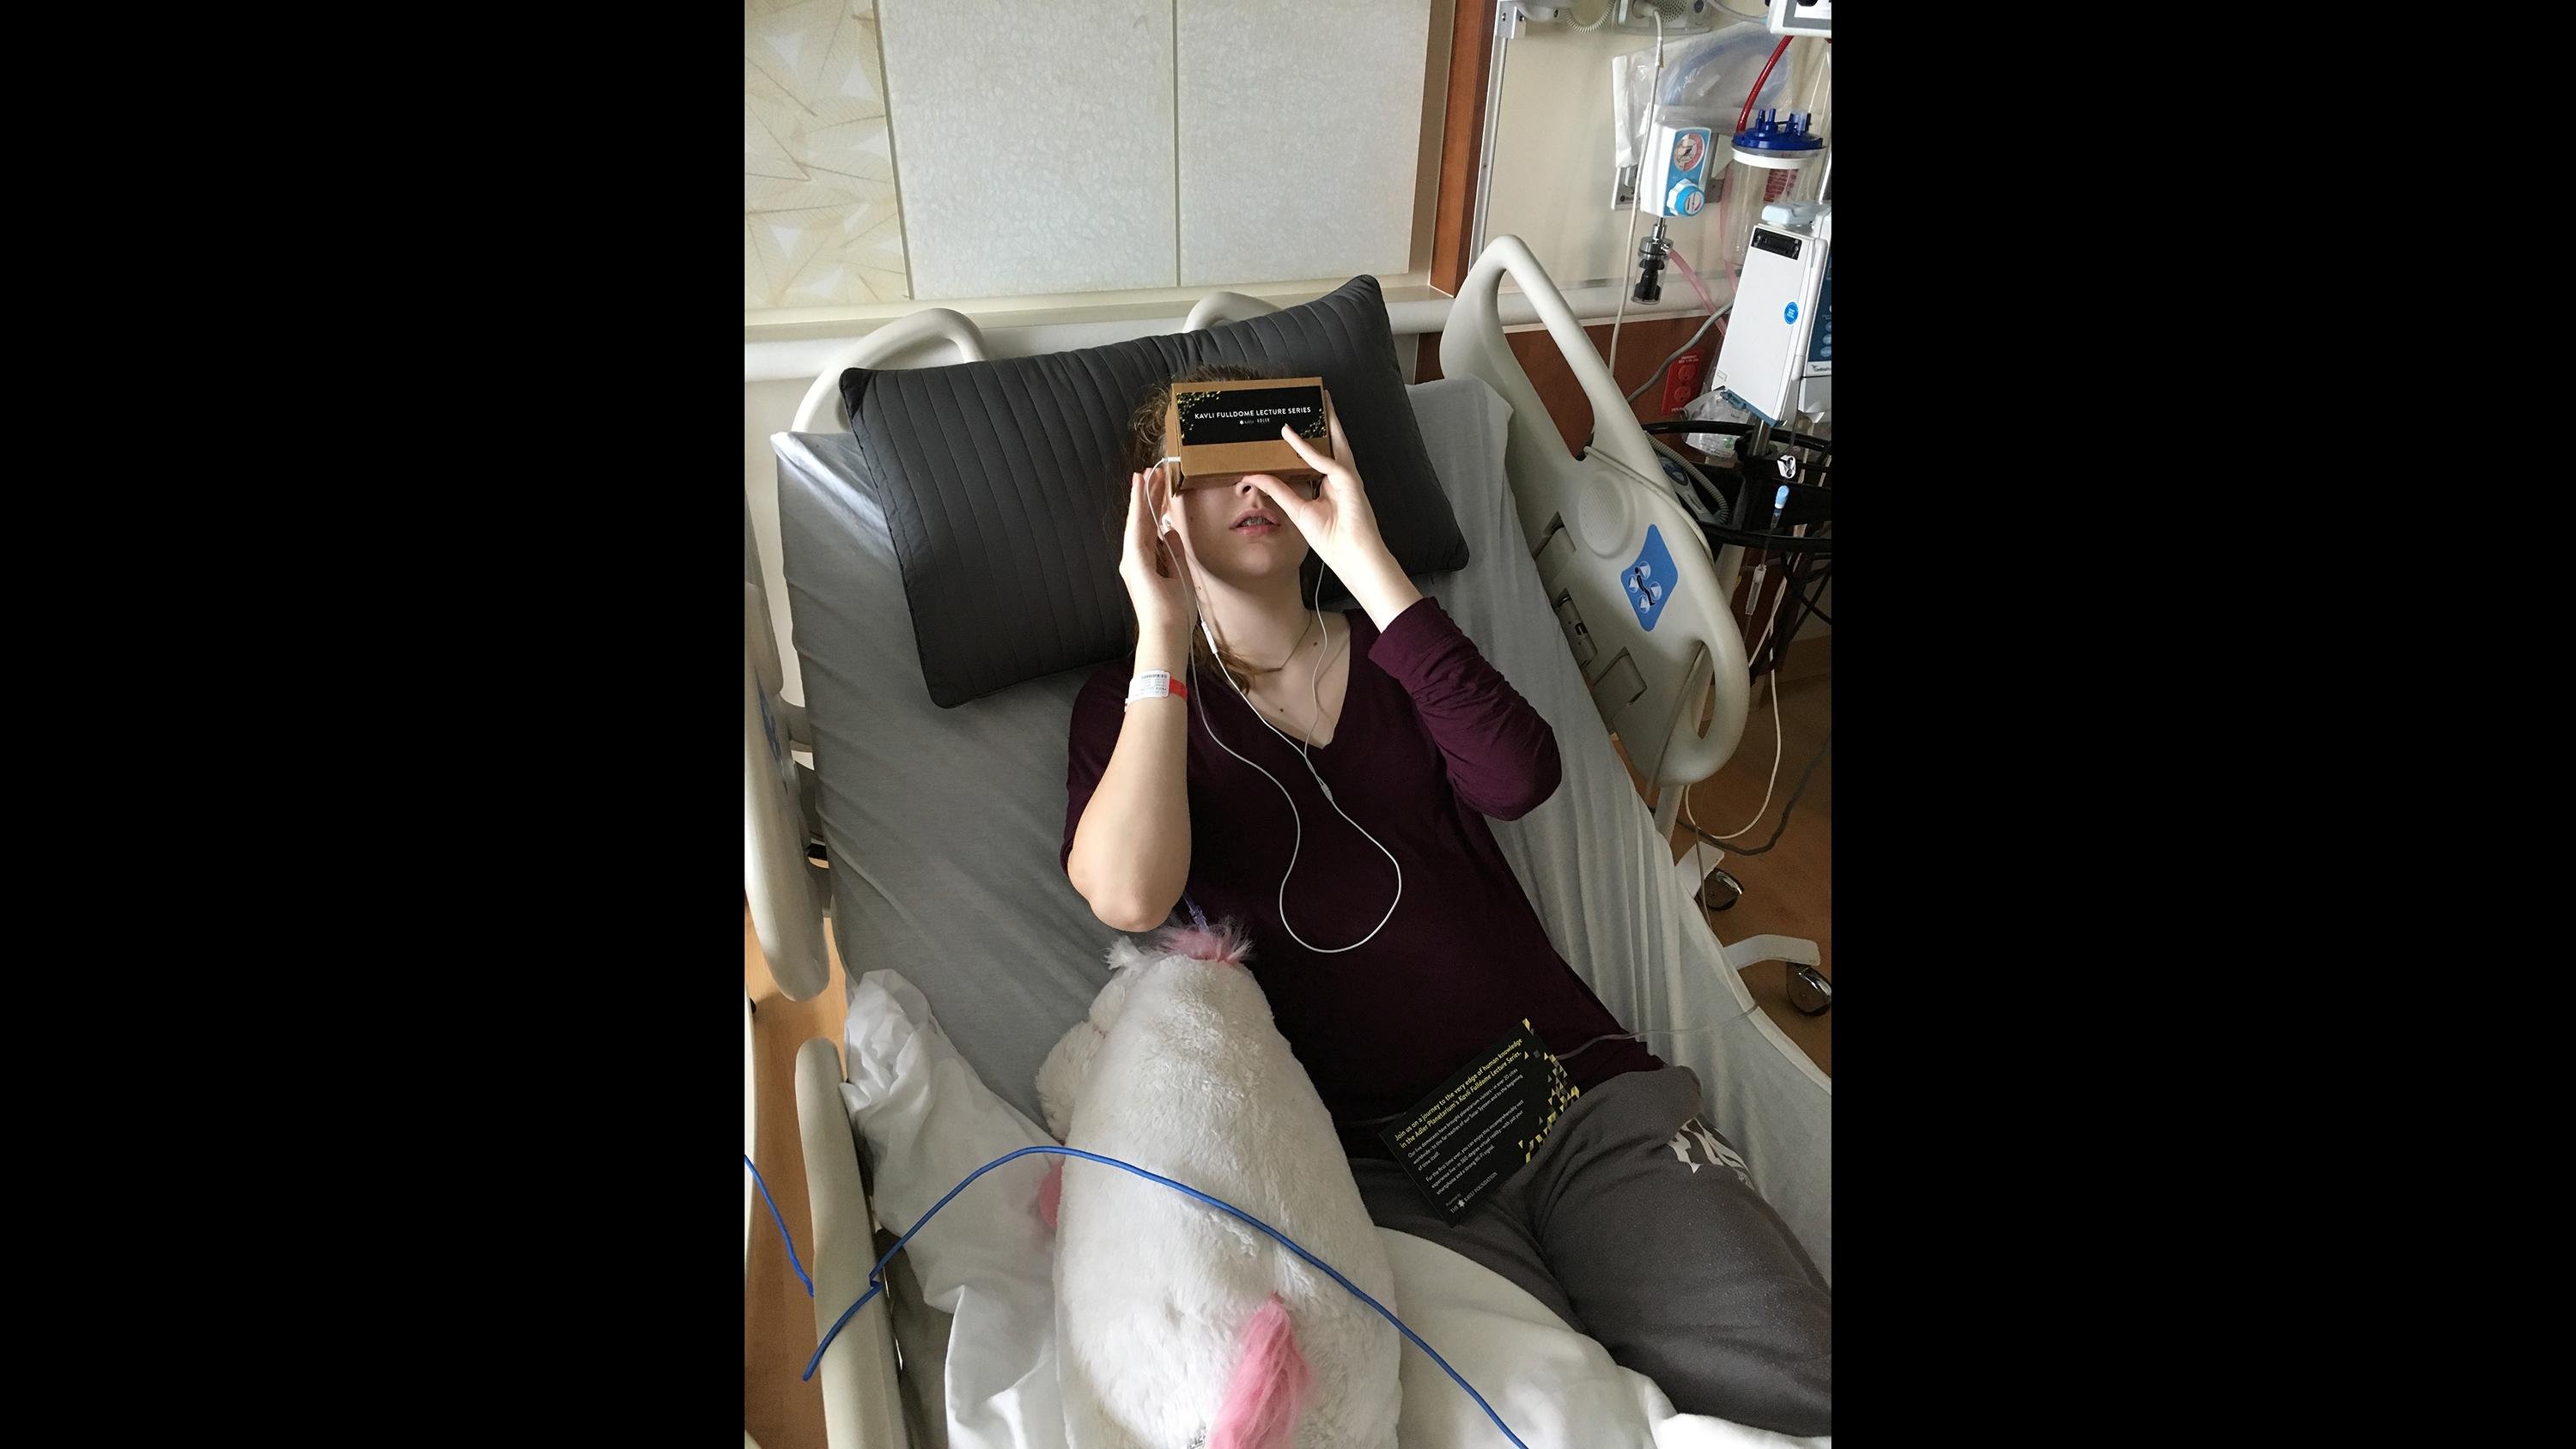 A patient at Lurie Children’s Hospital watches a Kavli Fulldome Lecture Series presentation in 2016 on a Google Cardboard device provided by Adler Planetarium. (Courtesy Lurie Children’s Hospital)